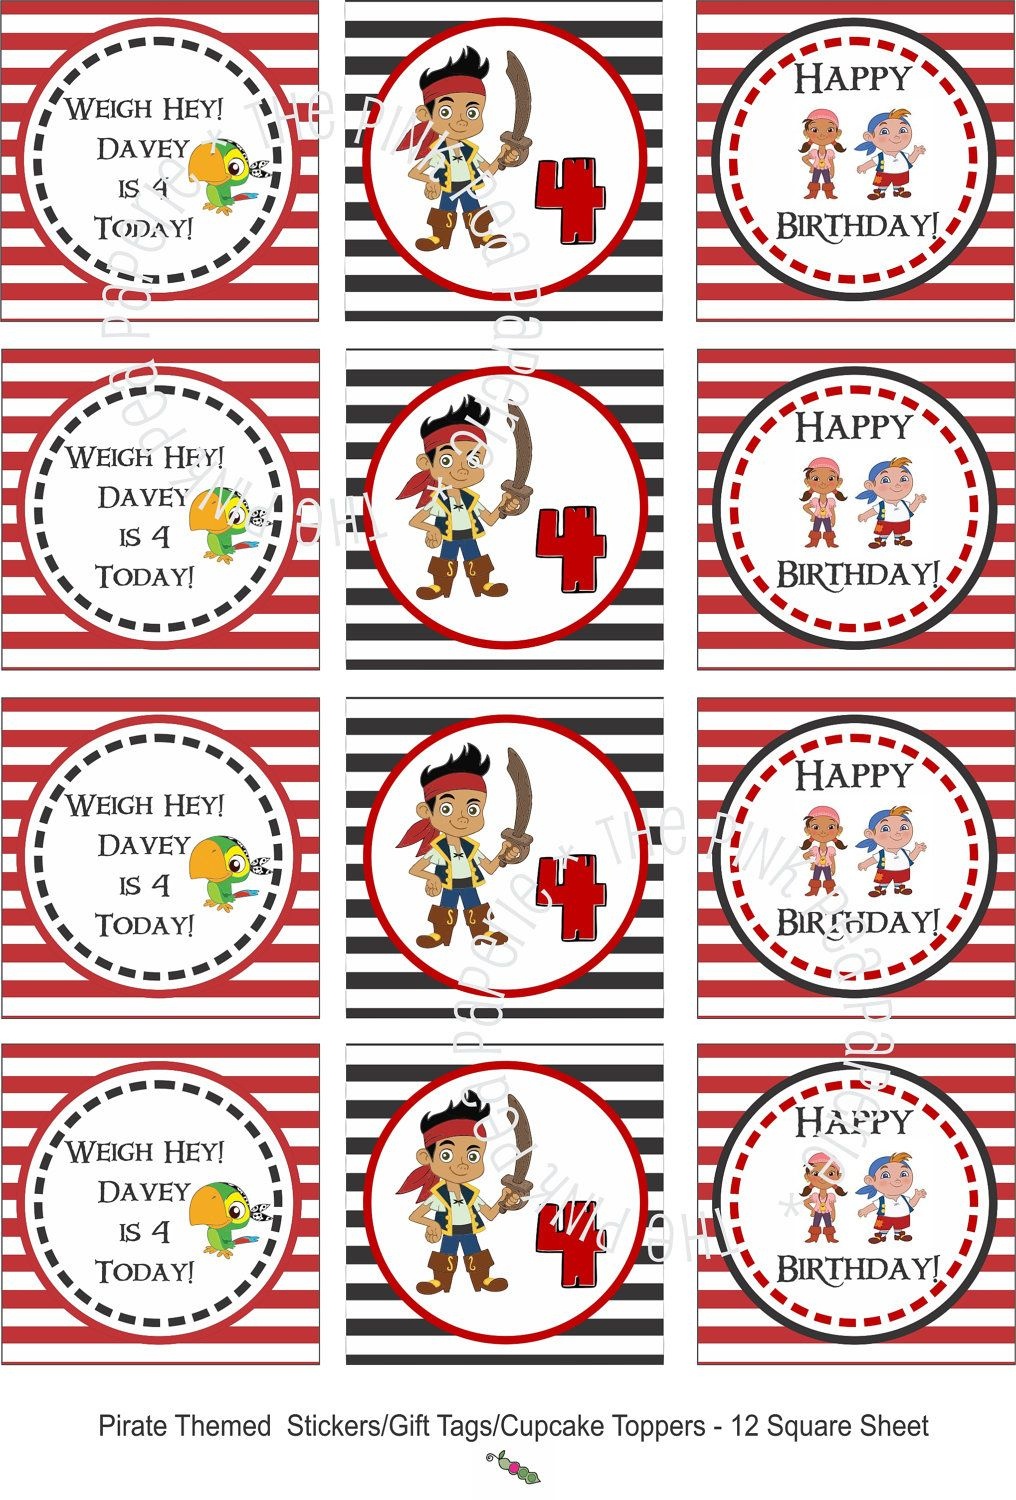 Custom Printable Jake And The Neverland Pirates Stickers Or Gift - Free Printable Jake And The Neverland Pirates Cupcake Toppers